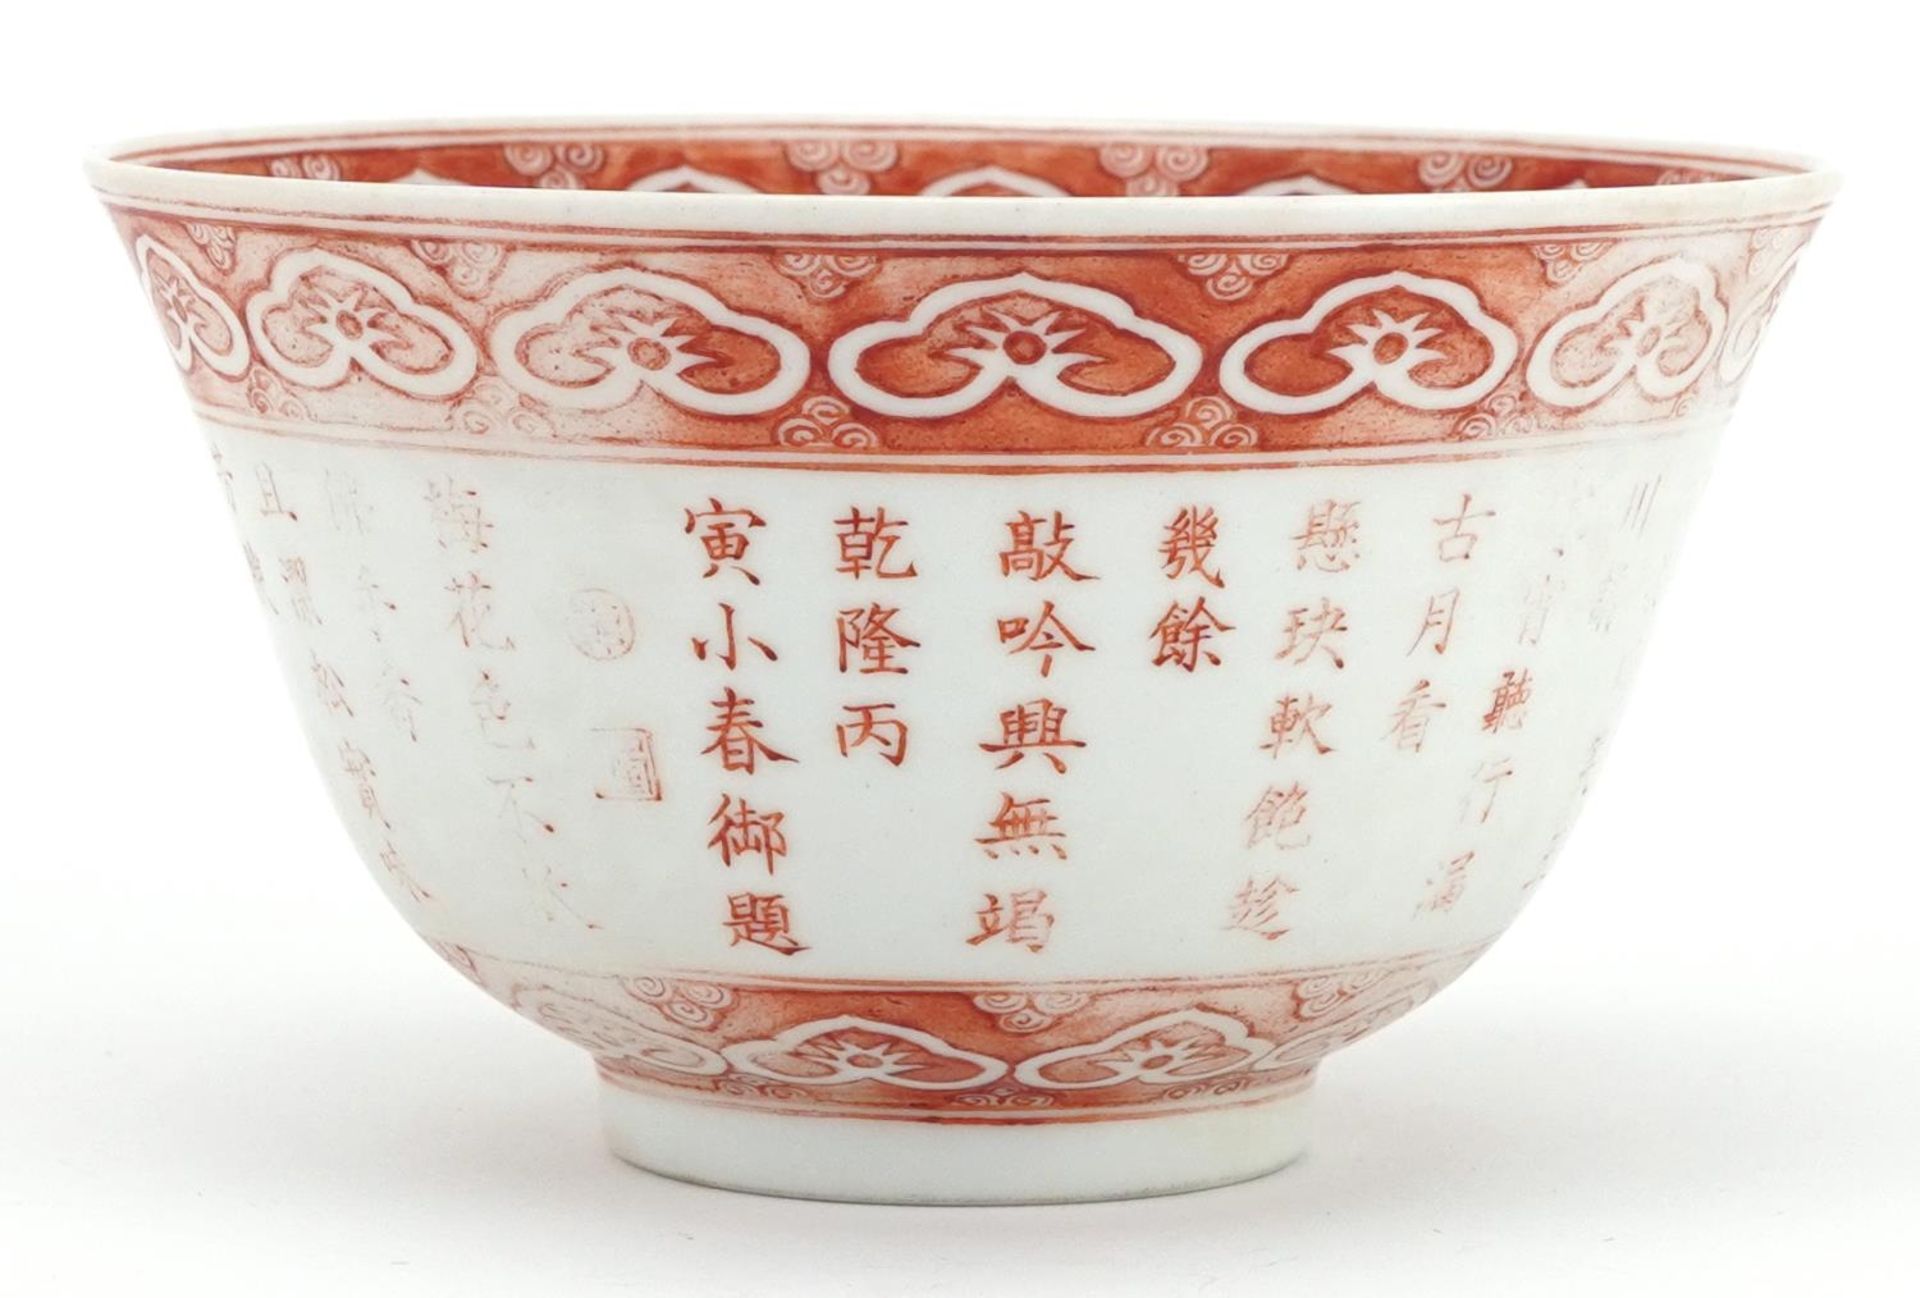 Chinese porcelain bowl hand painted in iron red with calligraphy within ruyi head borders, six